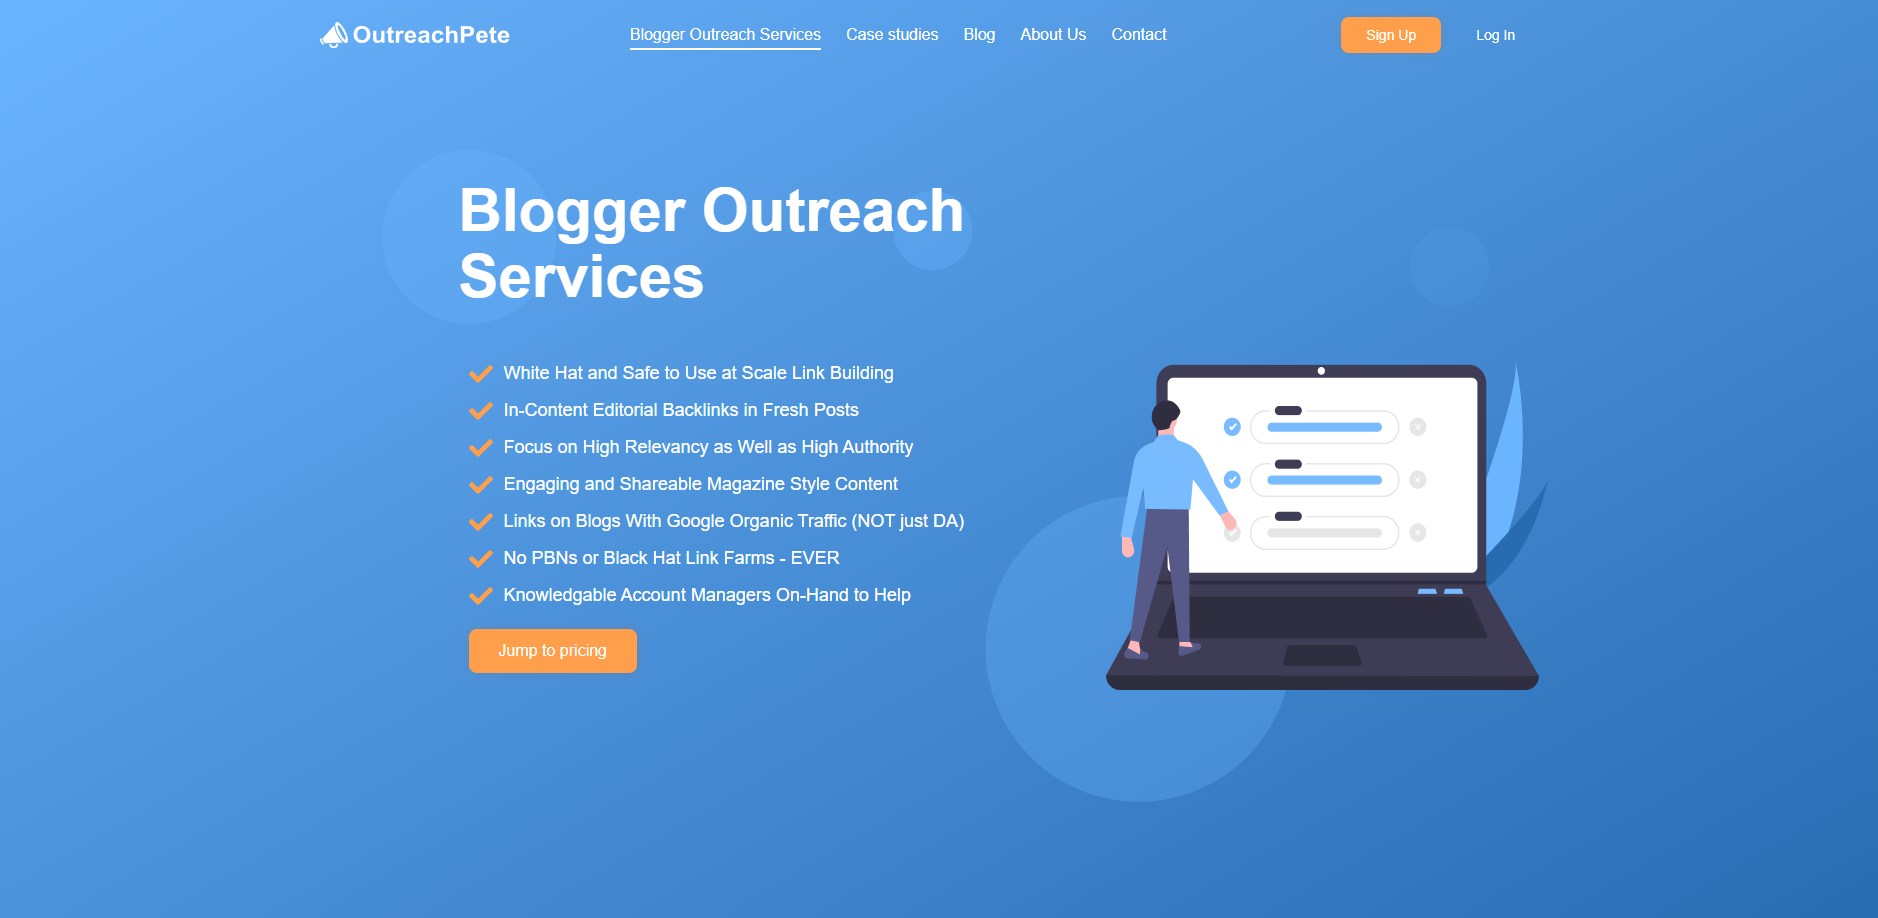 Outreachpete.com Services Page